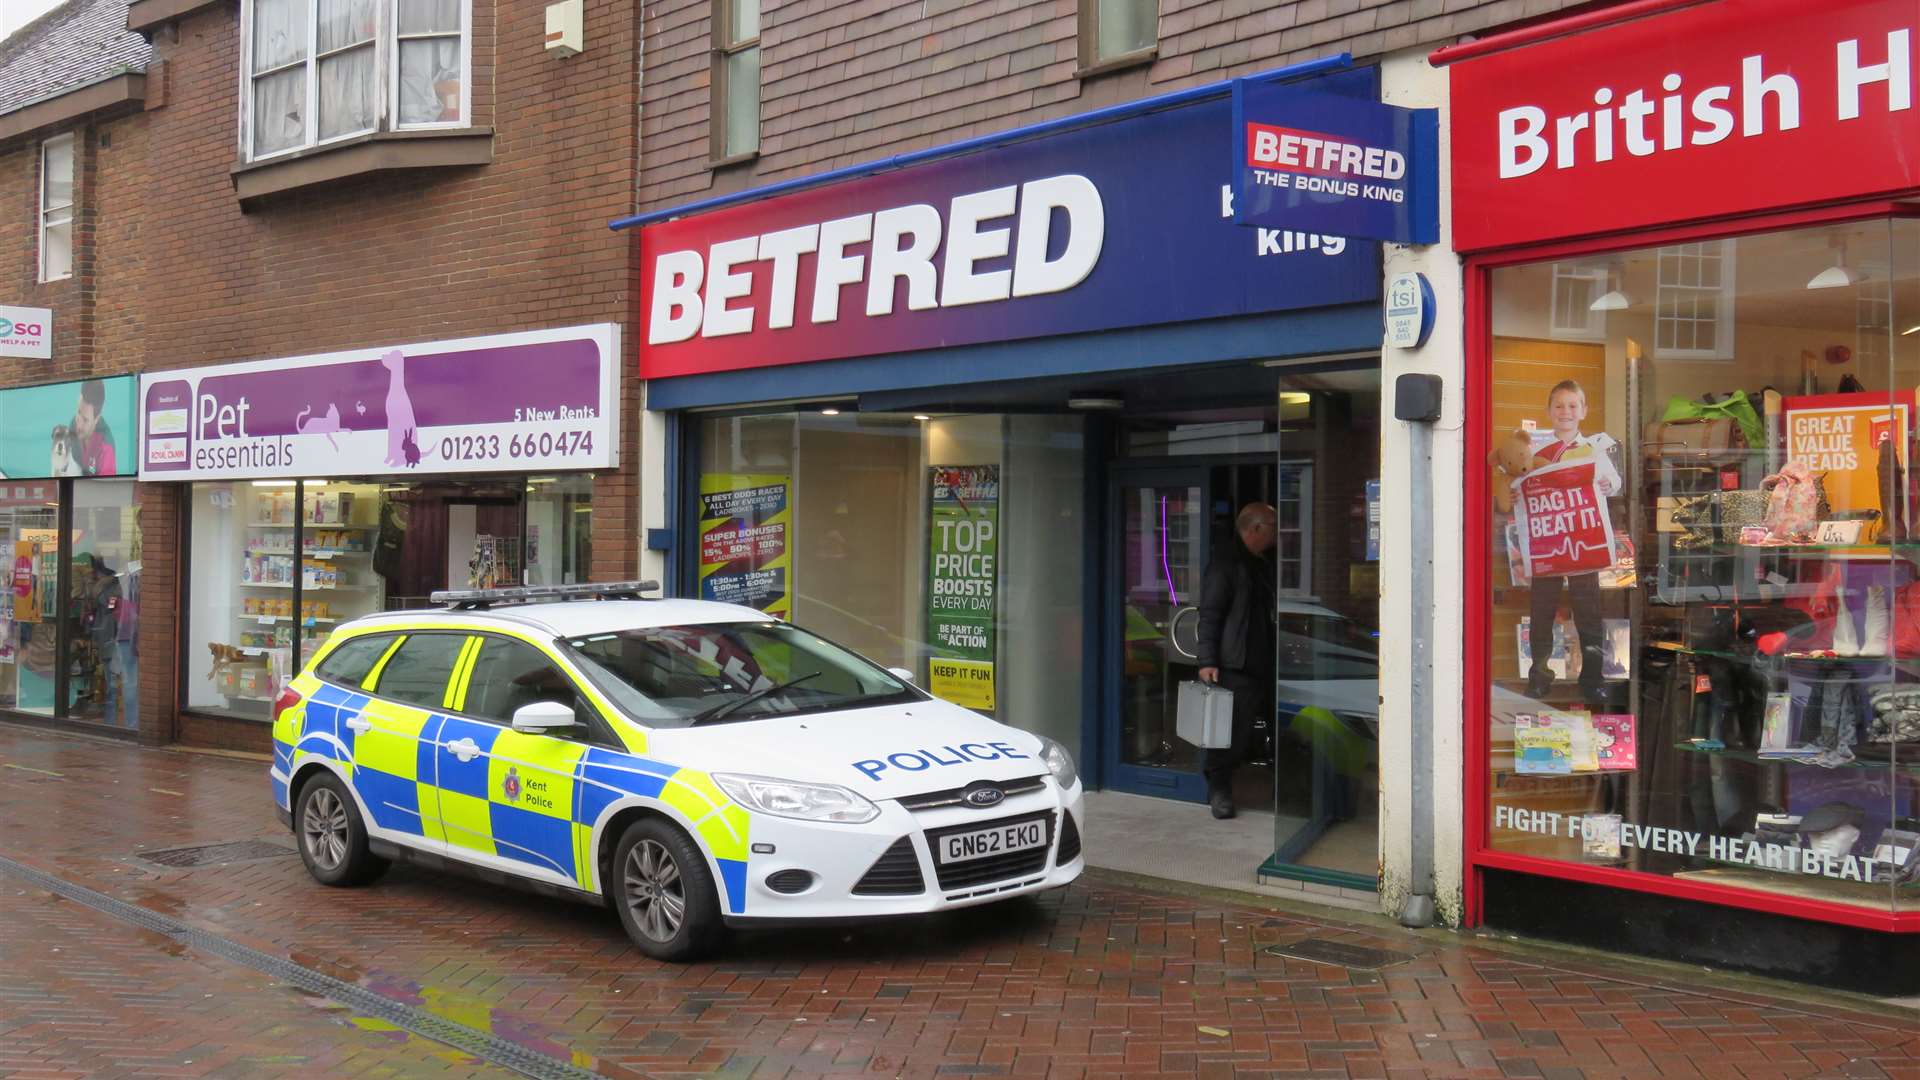 Police are outside the betting shop. Picture: Andy Clark